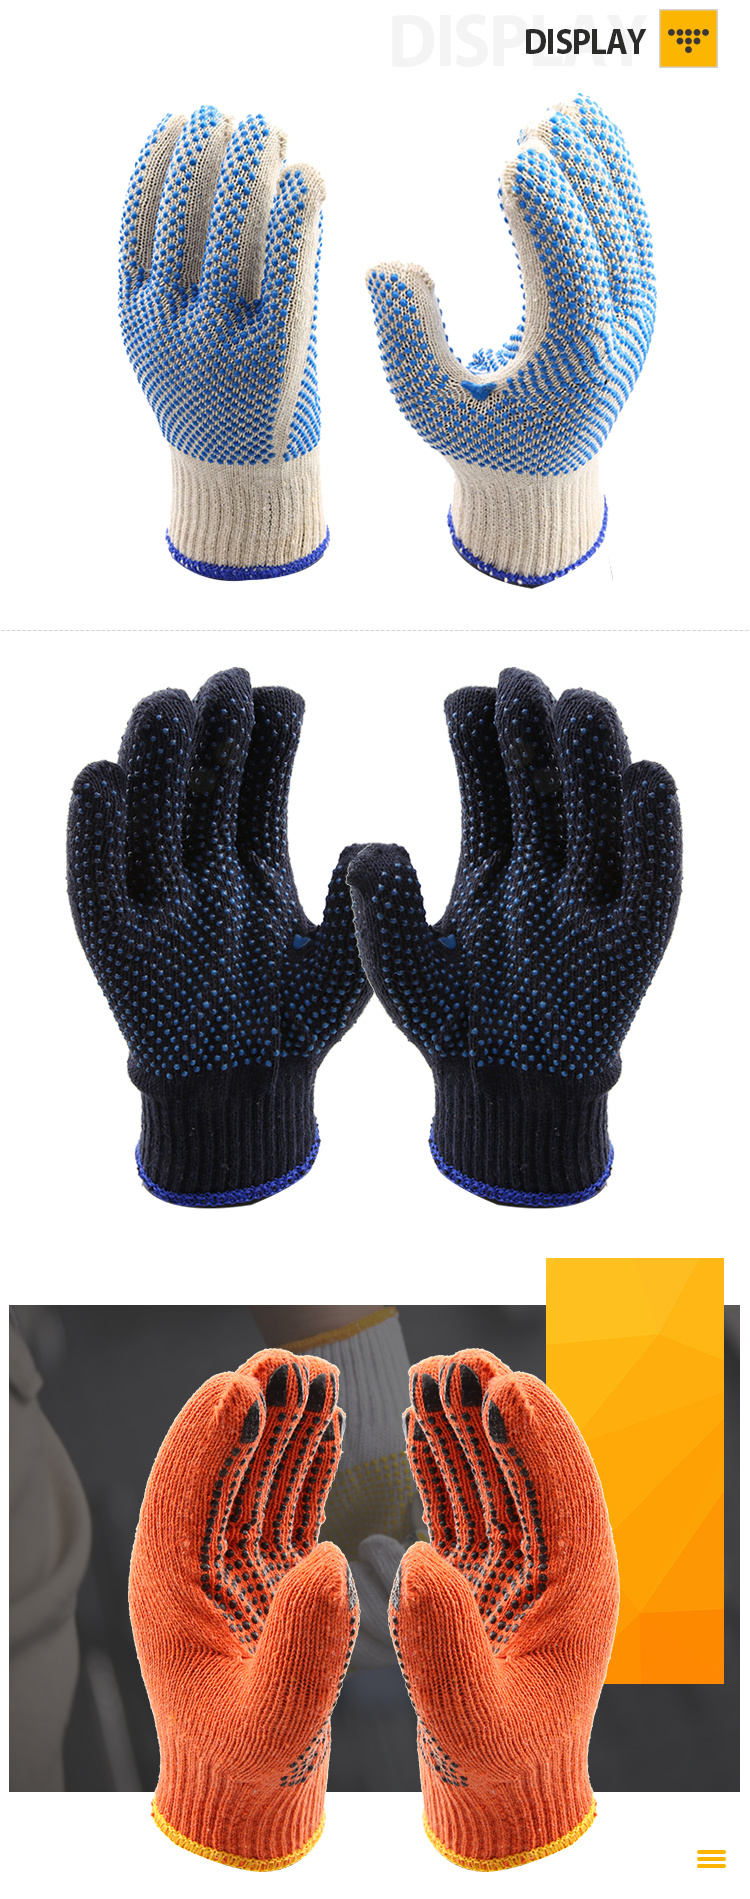 Safety String Knitted Cotton Work Knitted PVC DOT Glove